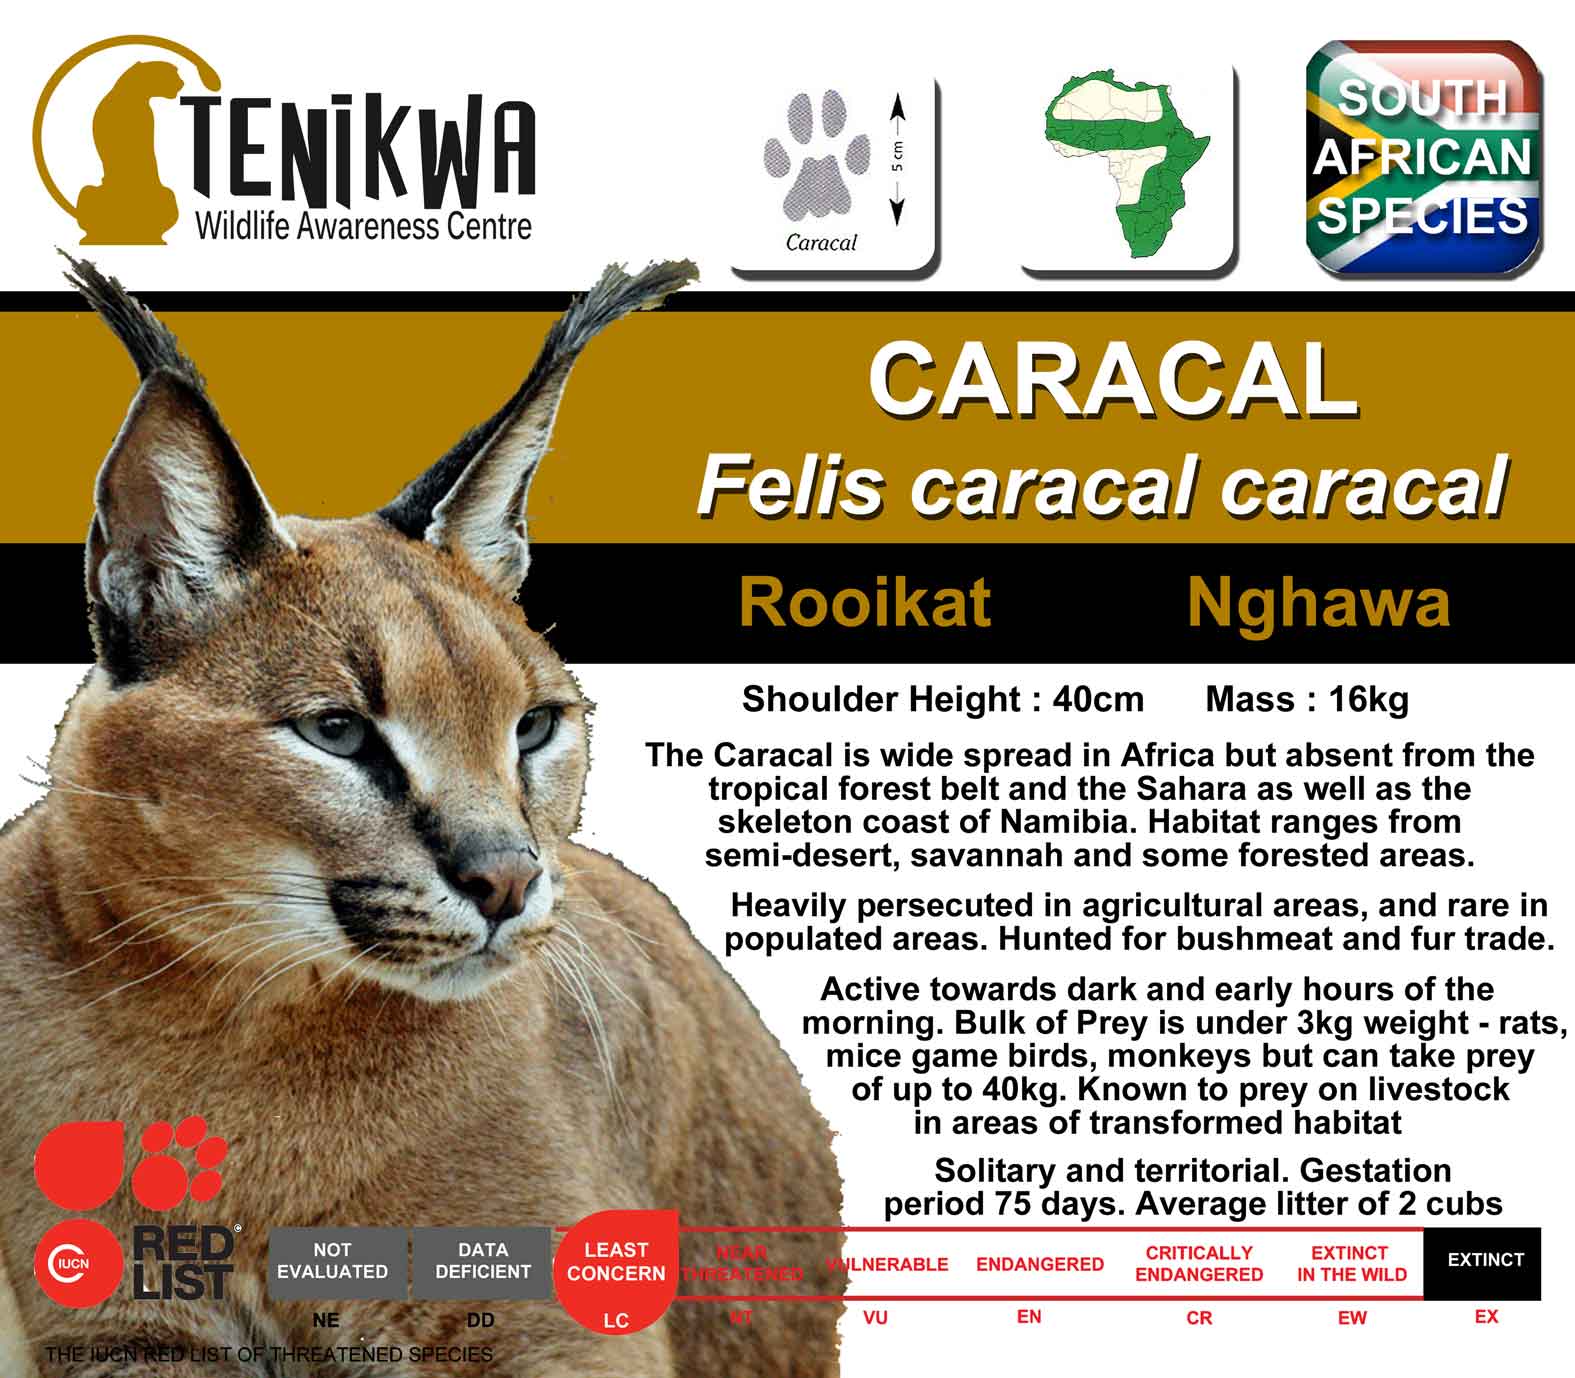 fun facts - factoids - interesting facts - caracal fact sheet - Tenikwa South African Species Wildlife Awareness Centre Caracal Caracal Felis caracal caracal Rooikat Nghawa Shoulder Height 40cm Mass 16kg The Caracal is wide spread in Africa but absent fro